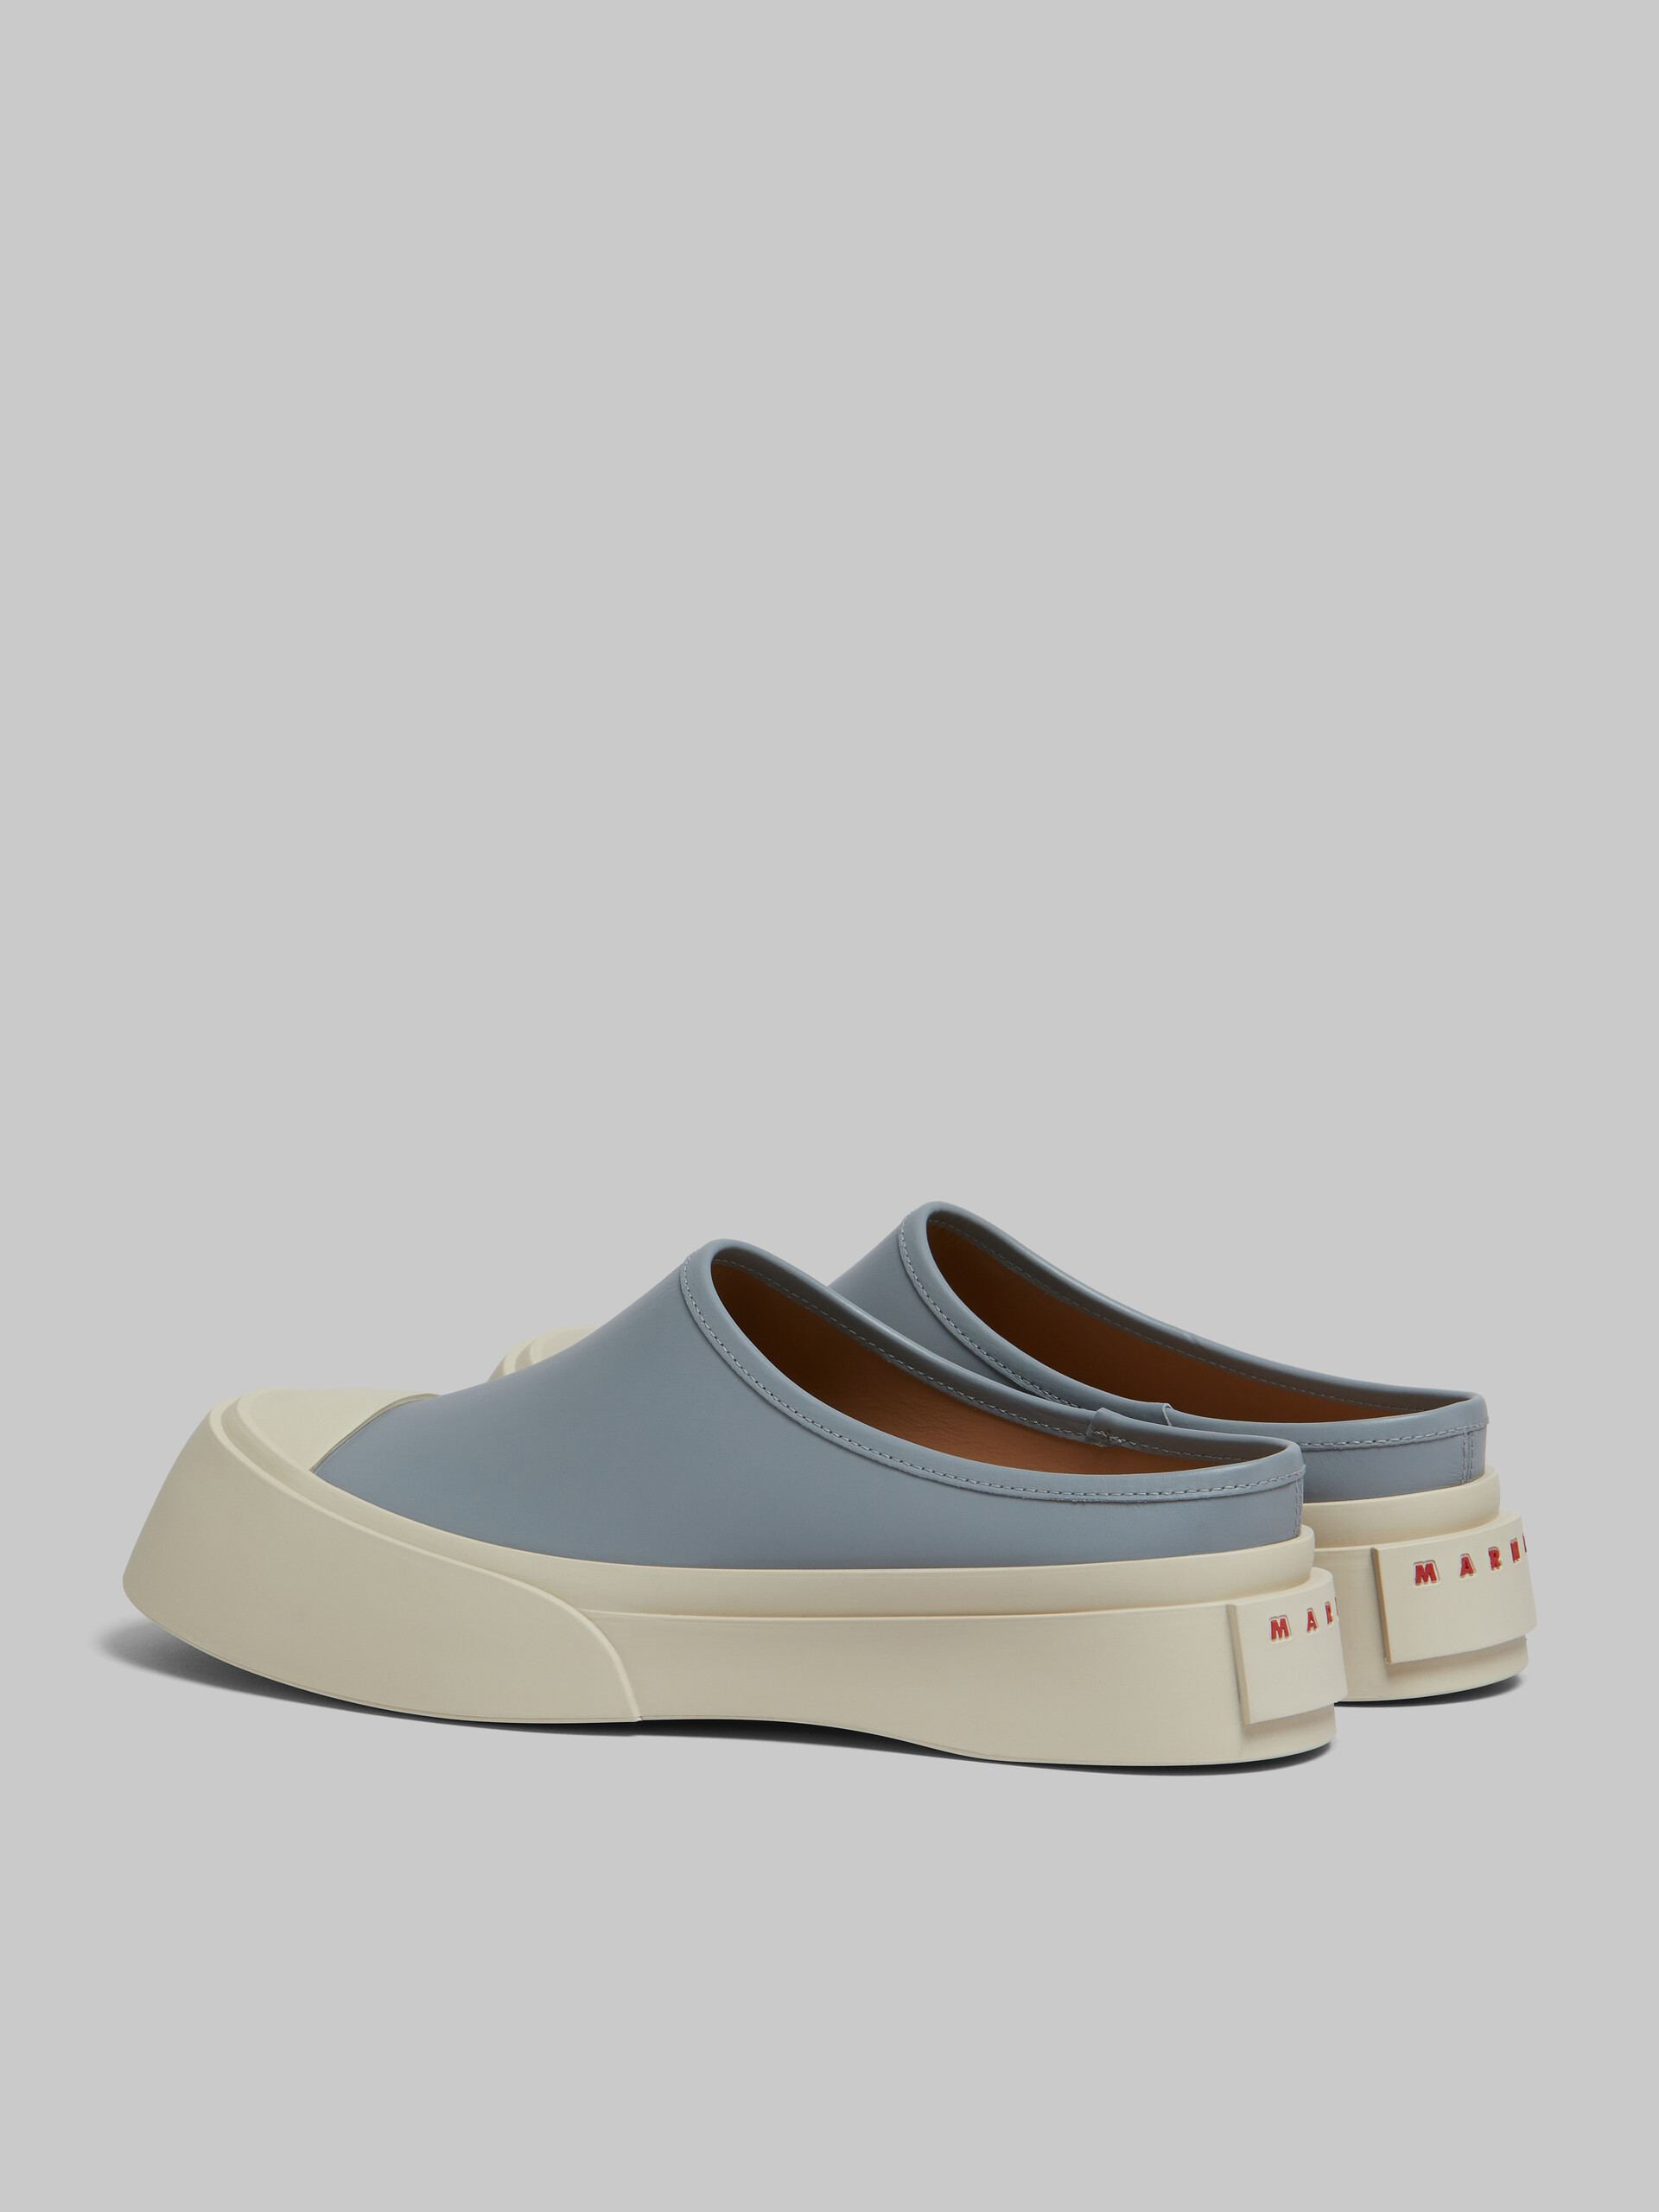 Grey leather Pablo sabot - Sneakers - Image 3